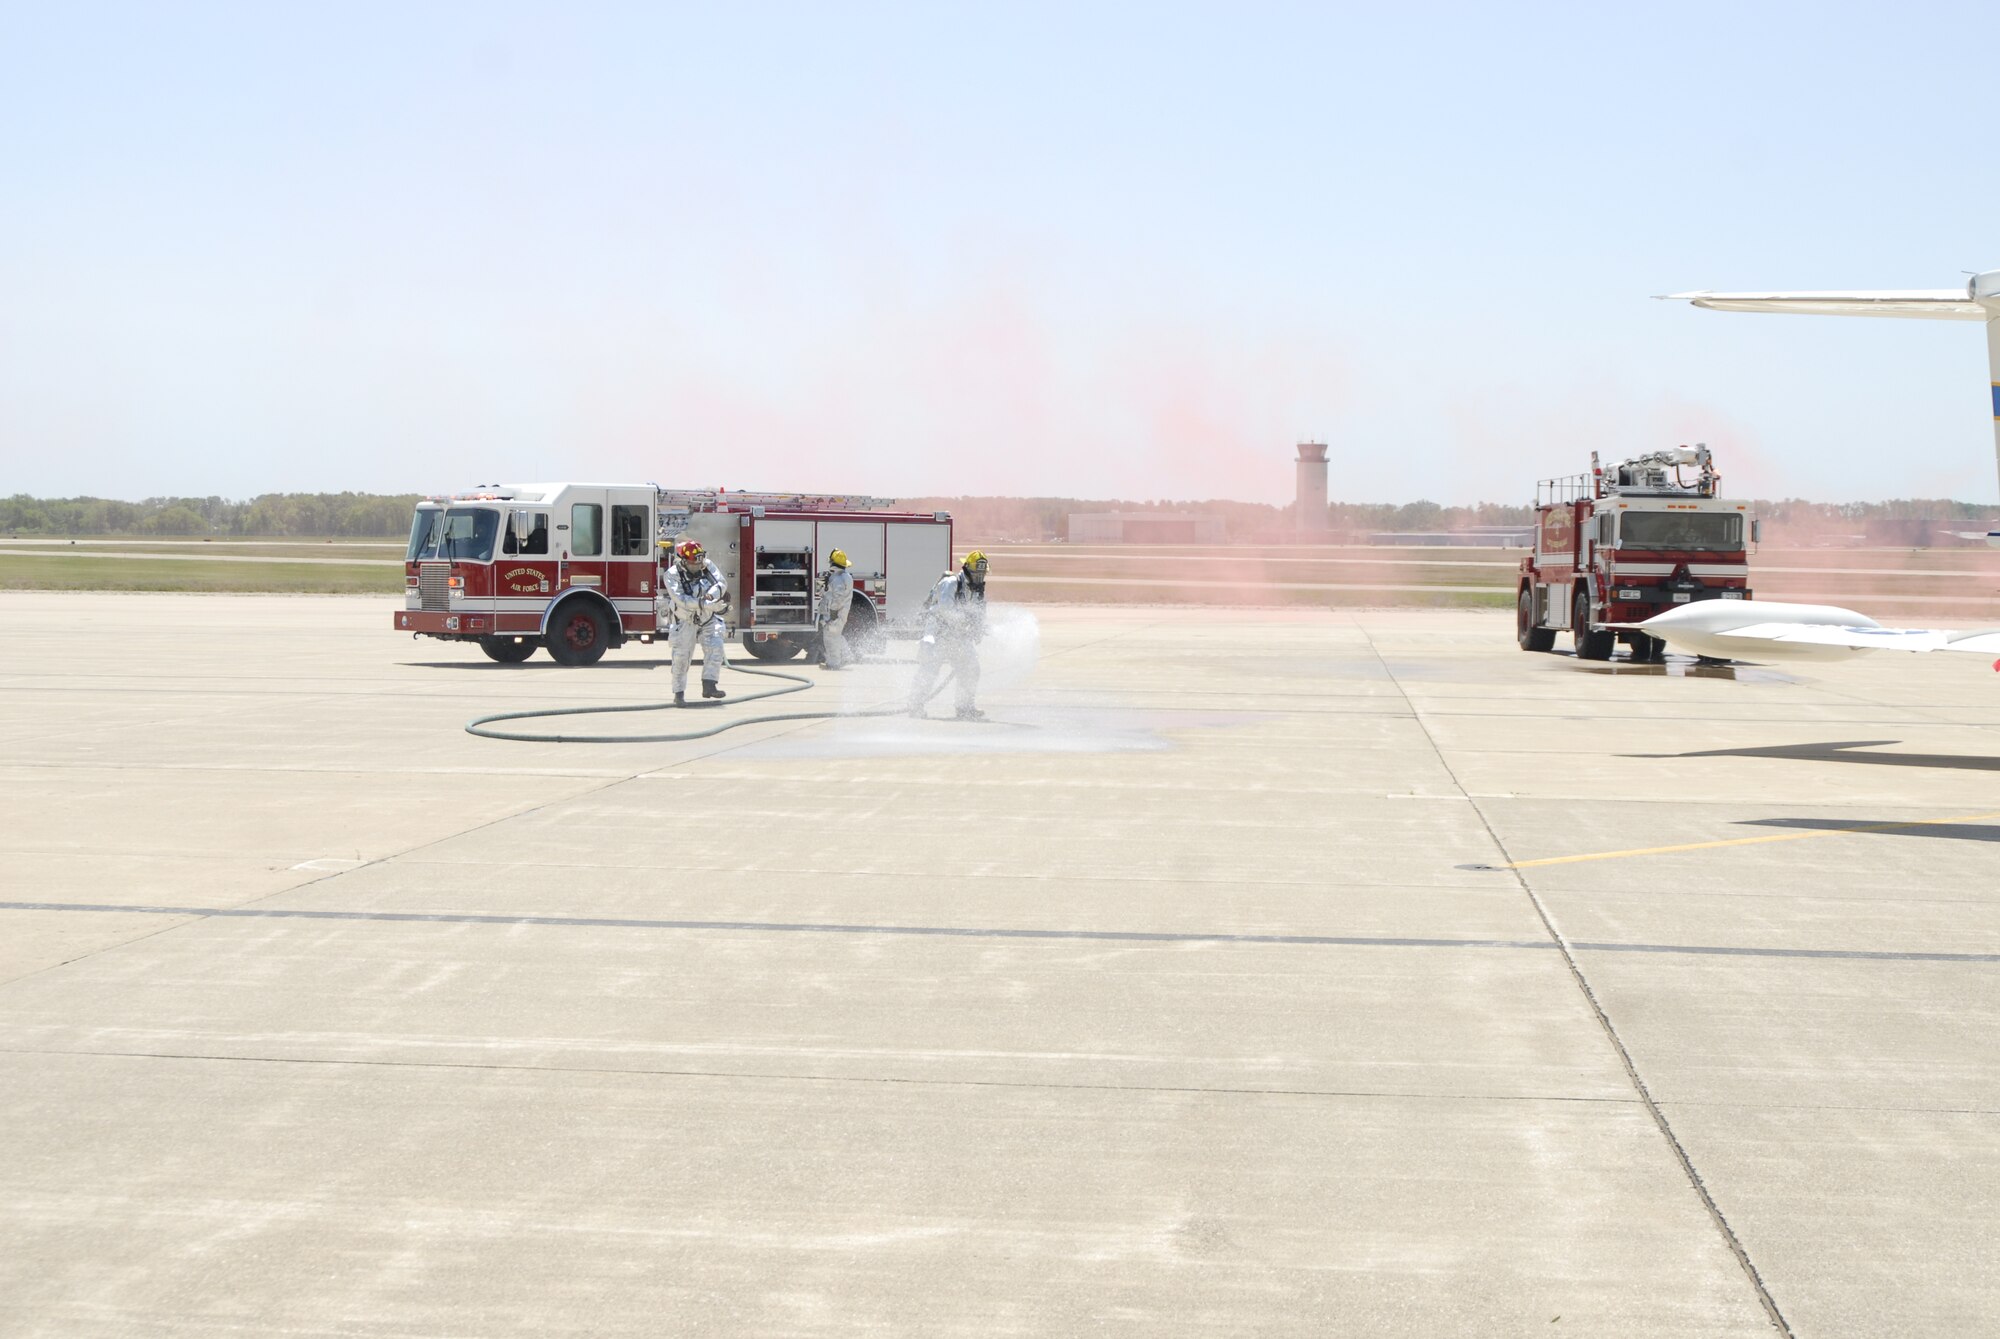 Servicemembers from the 110th Airlift Wing conduct a Massive Accident Response Exercise (MARE) is for training purposes at Battle Creek Air National Guard Base, Battle Creek, Mich. on May 15, 2012. There were members from all groups that participated in the exercise. 